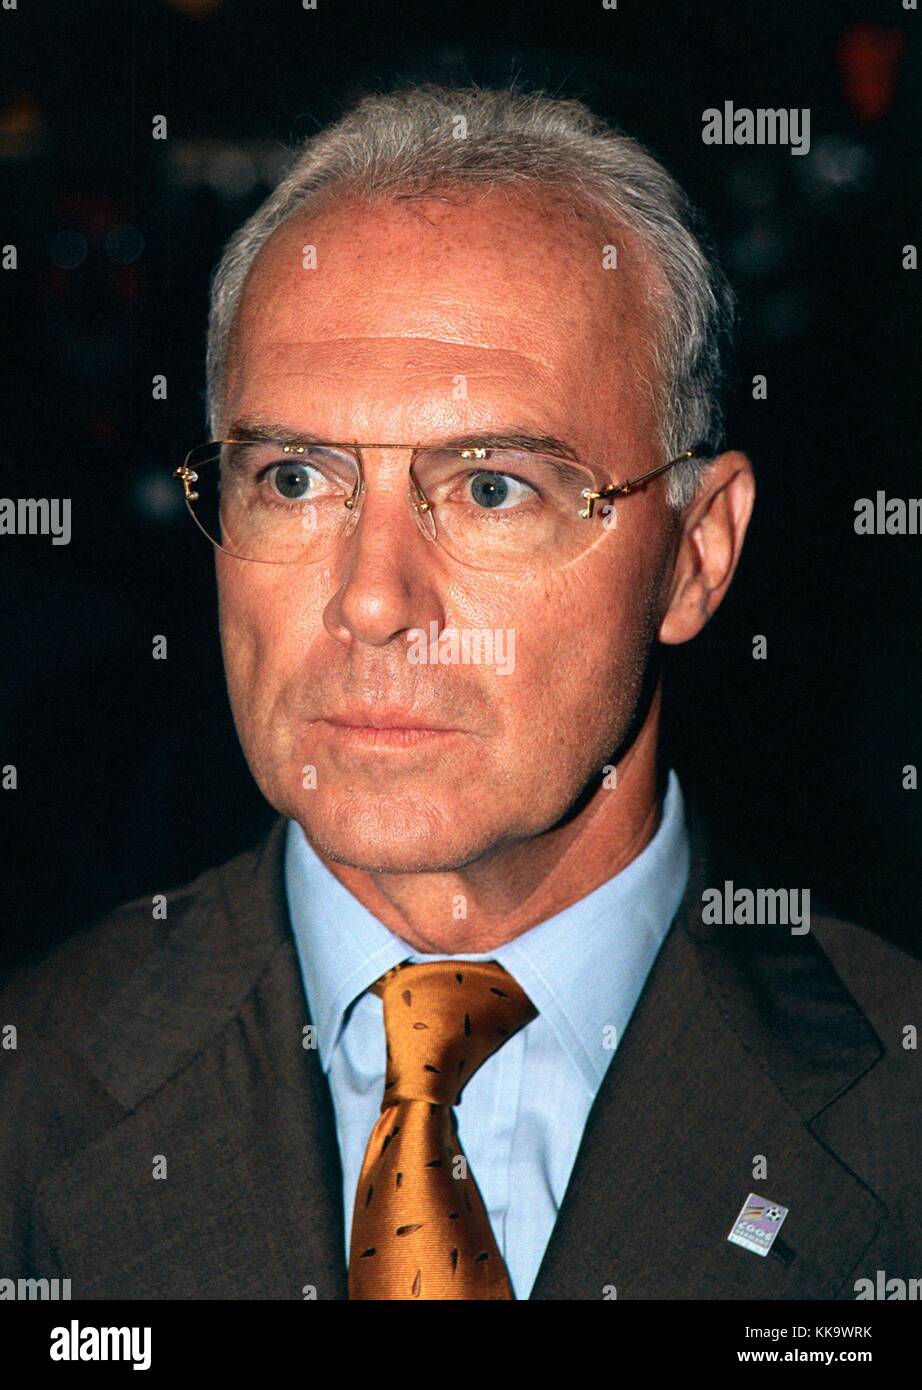 Franz Beckenbauer 'Football Player of the Century' at ARD gala show 'Wilkommen im Fußbal-Land' in Cologne Arena, pictured on 21st July 1999. | usage worldwide Stock Photo